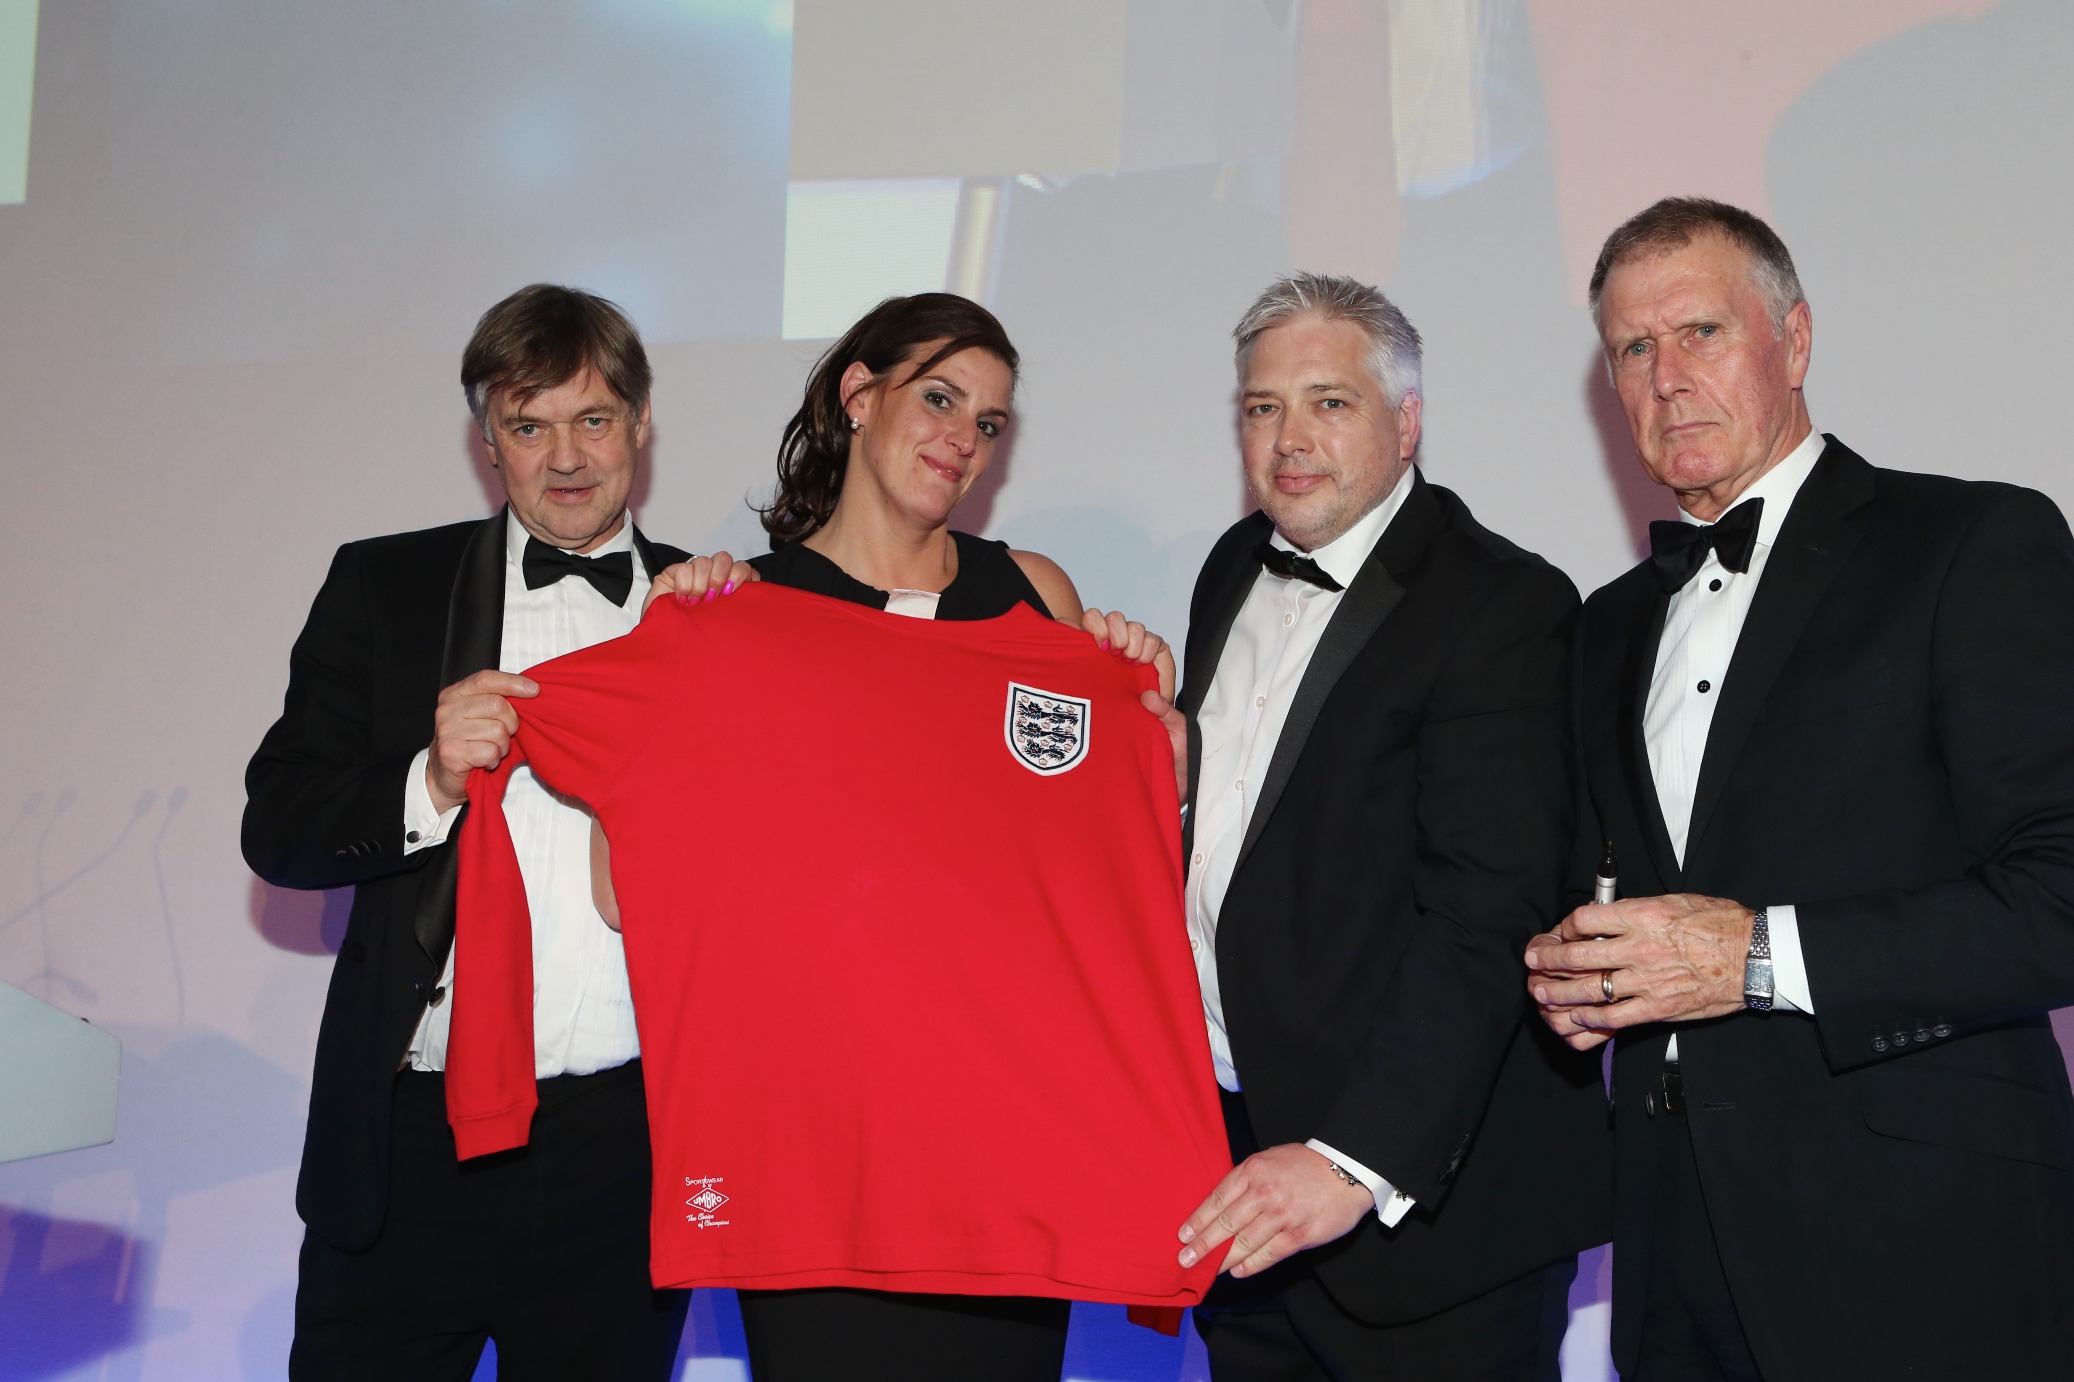 Graham White & Co collecting their replica 1966 England shirt from Geoff Hurst.